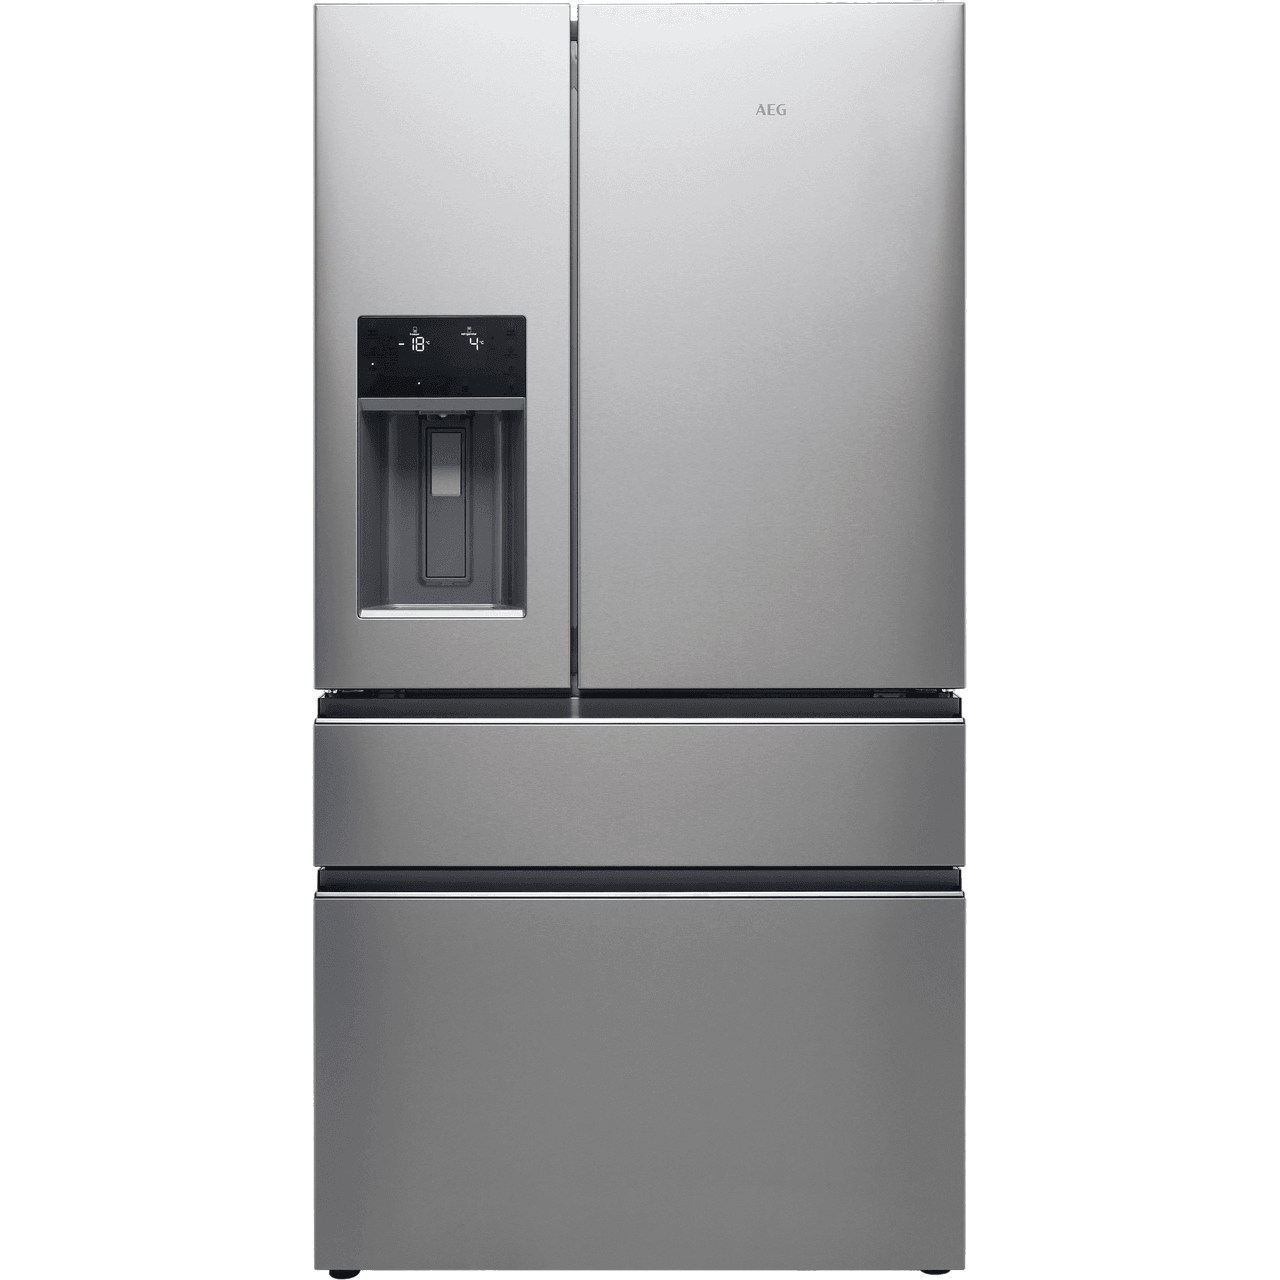 The new AEG matching fridge and freezer offers a more spacious